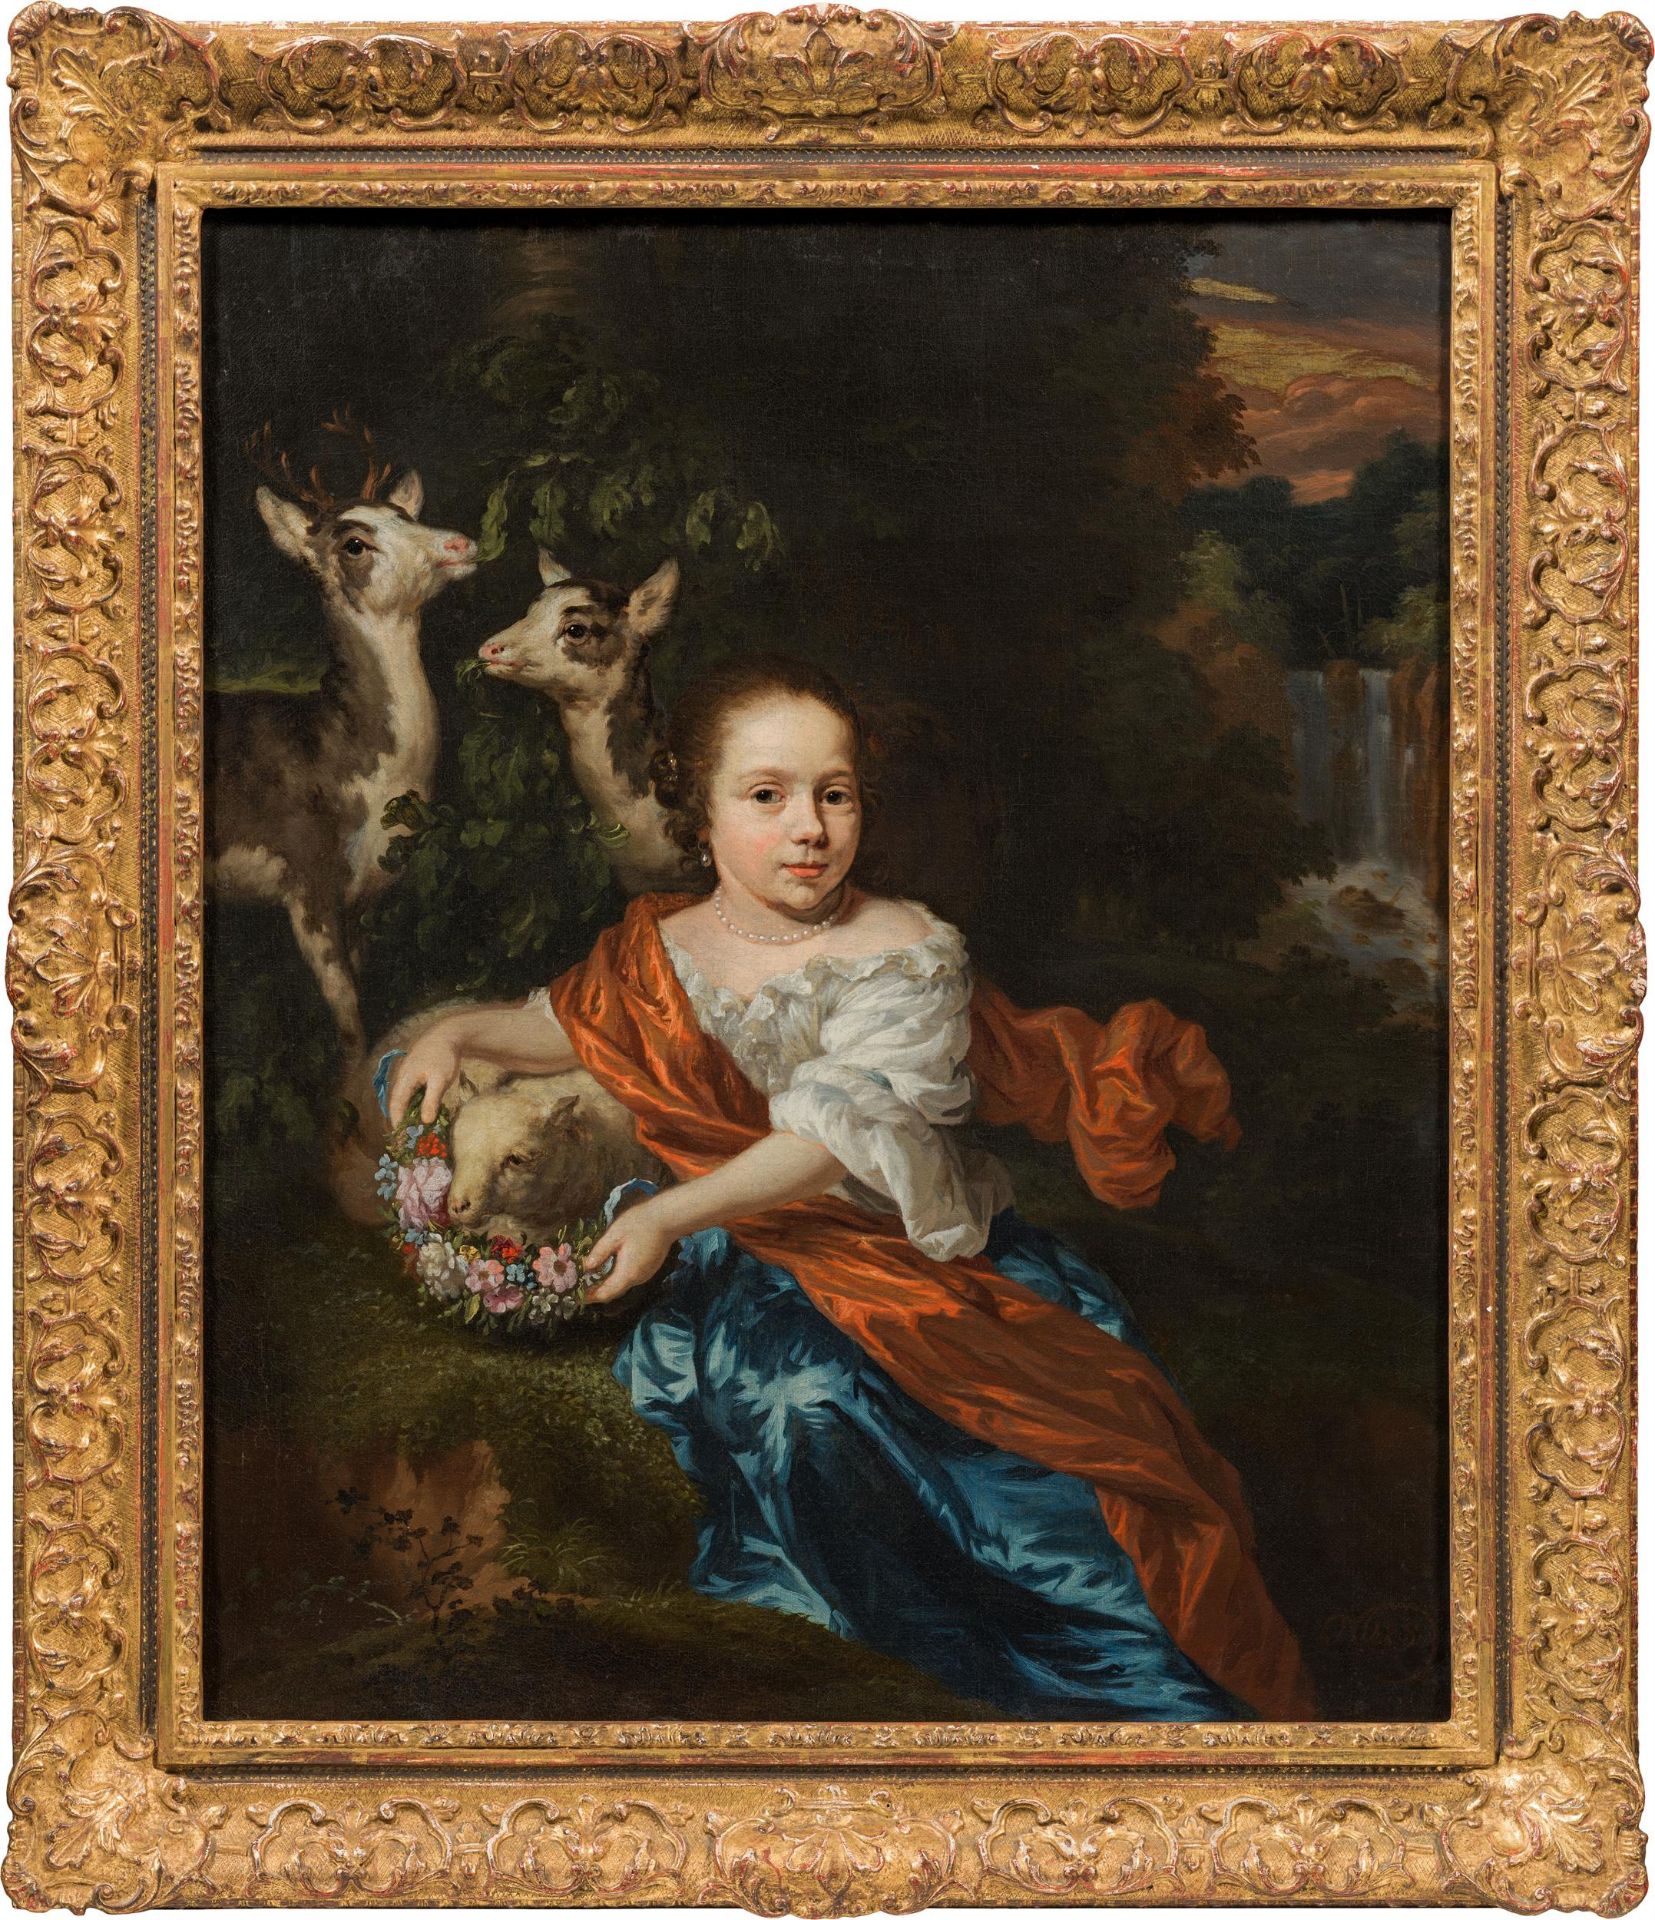 Nicolaes Maes: Girl with lamb and deer - Image 2 of 2